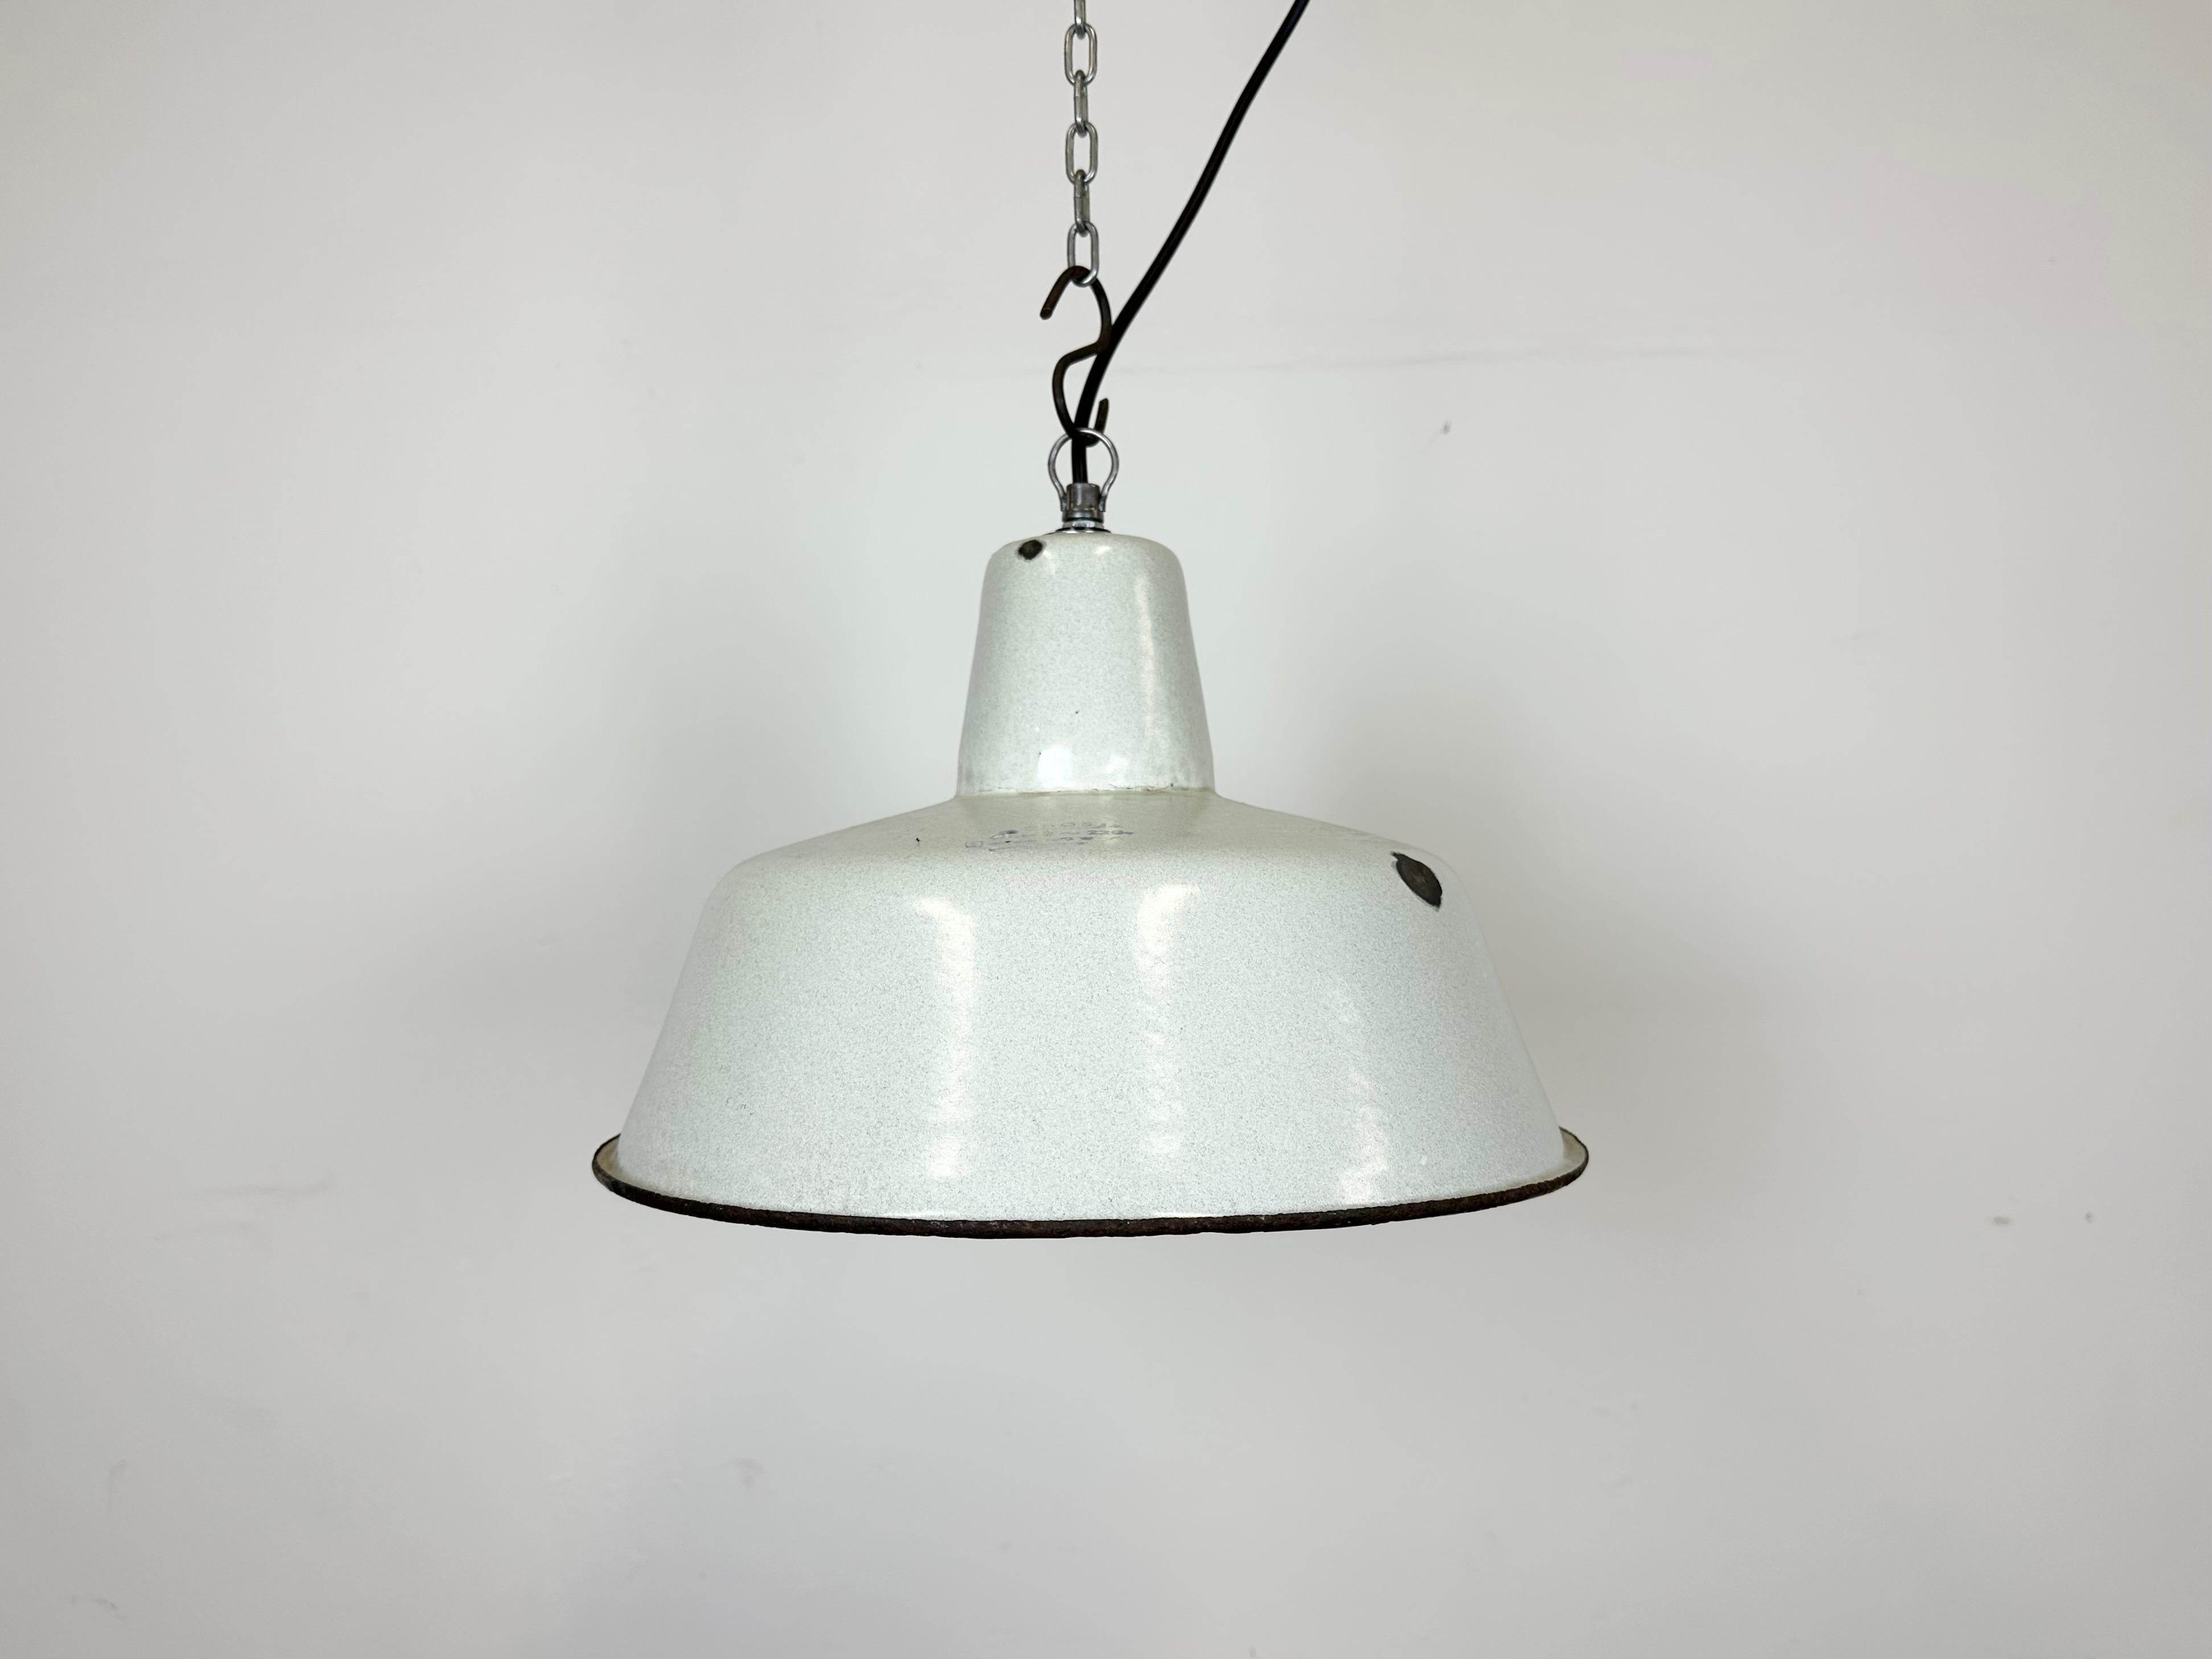 Industrial dark white (light grey) enamel pendant light made by Zaos in Poland during the 1960s. White enamel inside the shade. Iron top. The porcelain socket requires E 27/ E 26 light bulbs. New wire. Fully functional. The weight of the lamp is 1,2